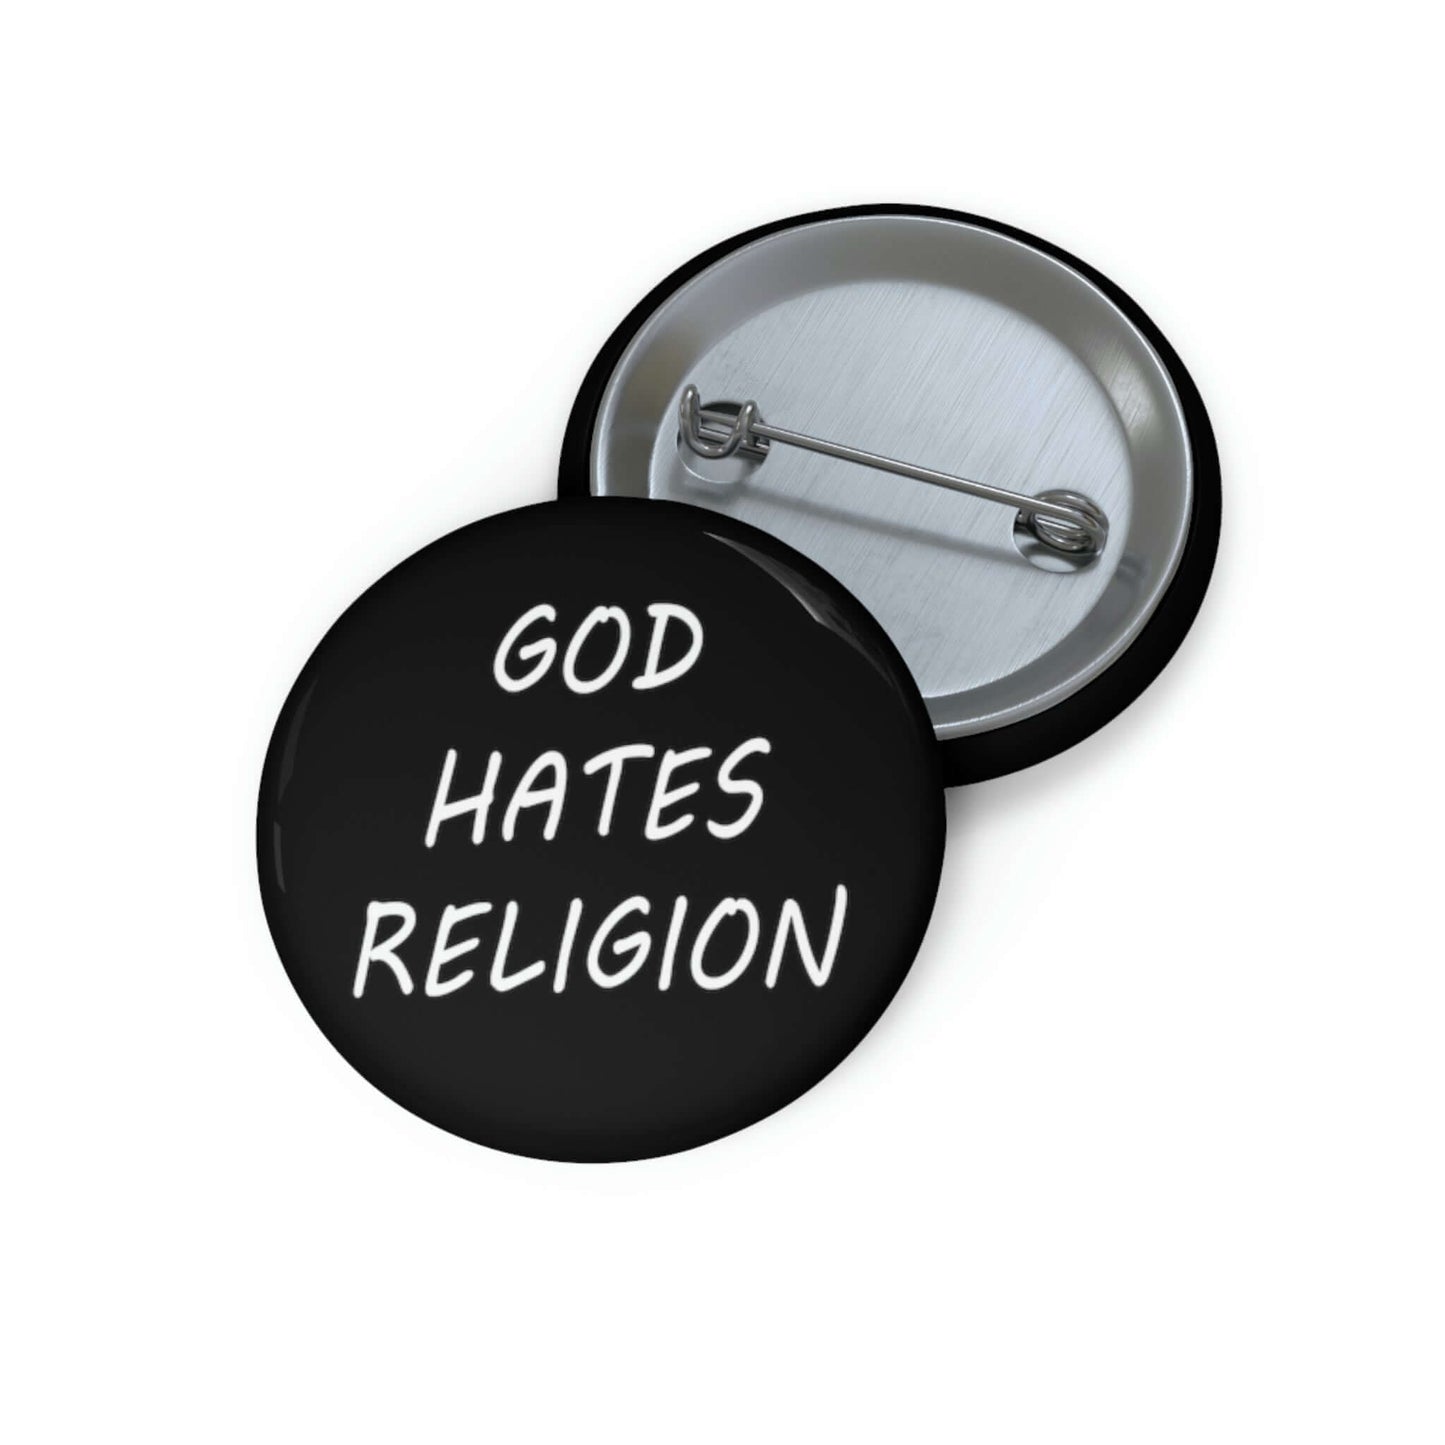 God hates religion pin-back button